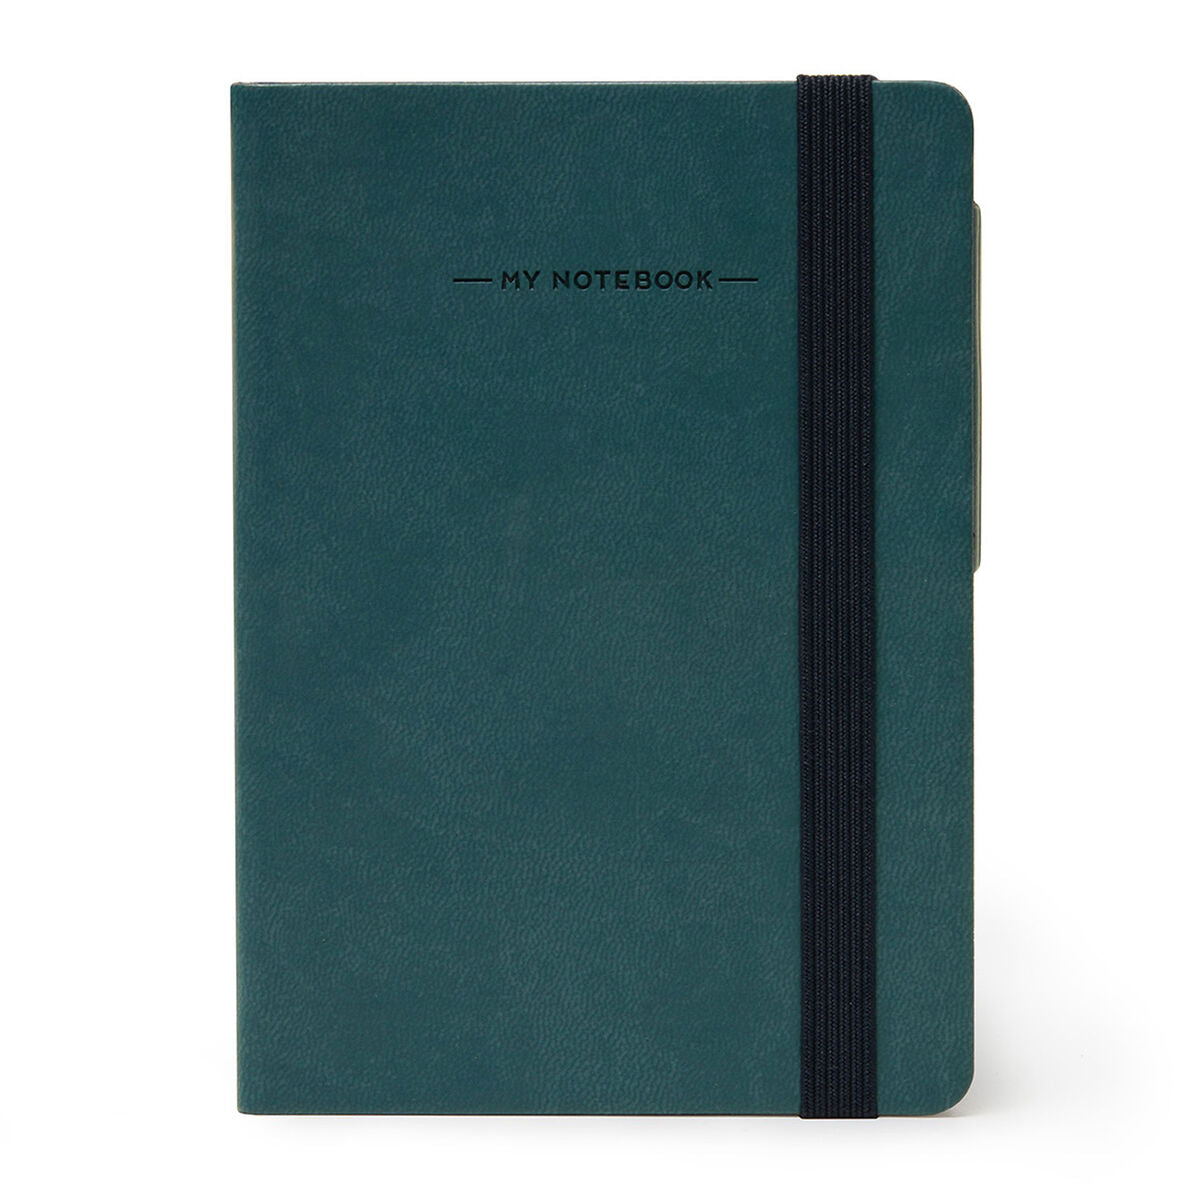 Notebooks - Legami My Notebook Small - Plain Petrol Blue by Weirs of Baggot Street